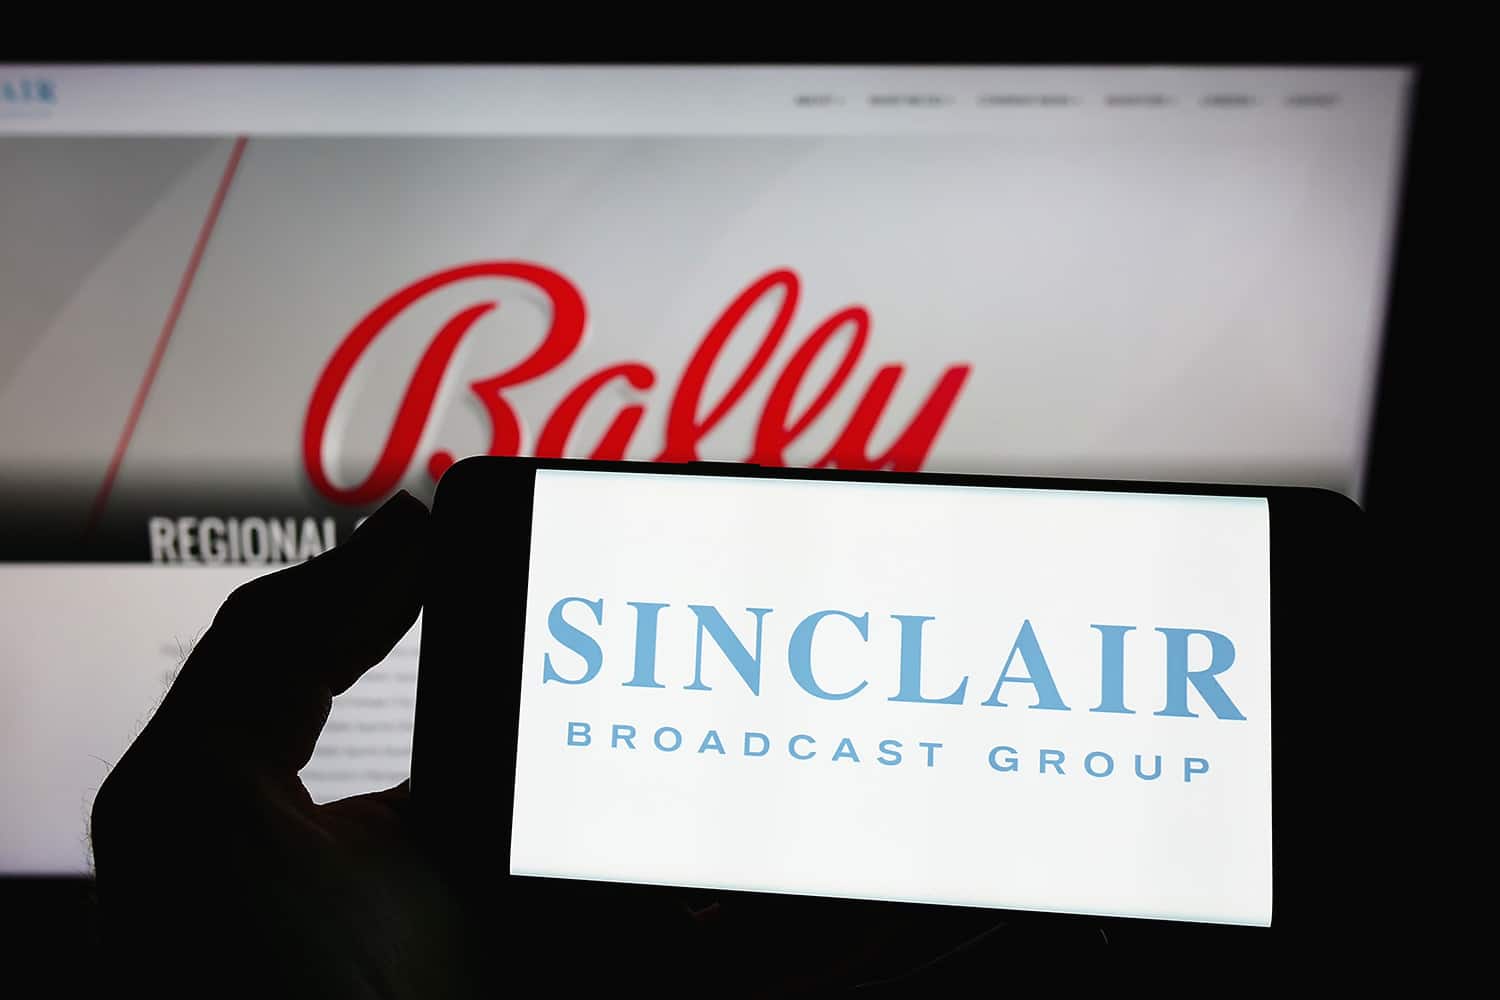 A phone displaying the Sinclair Broadcast Group logo is shown in front of the logo of their RSN brand, Bally Sports.